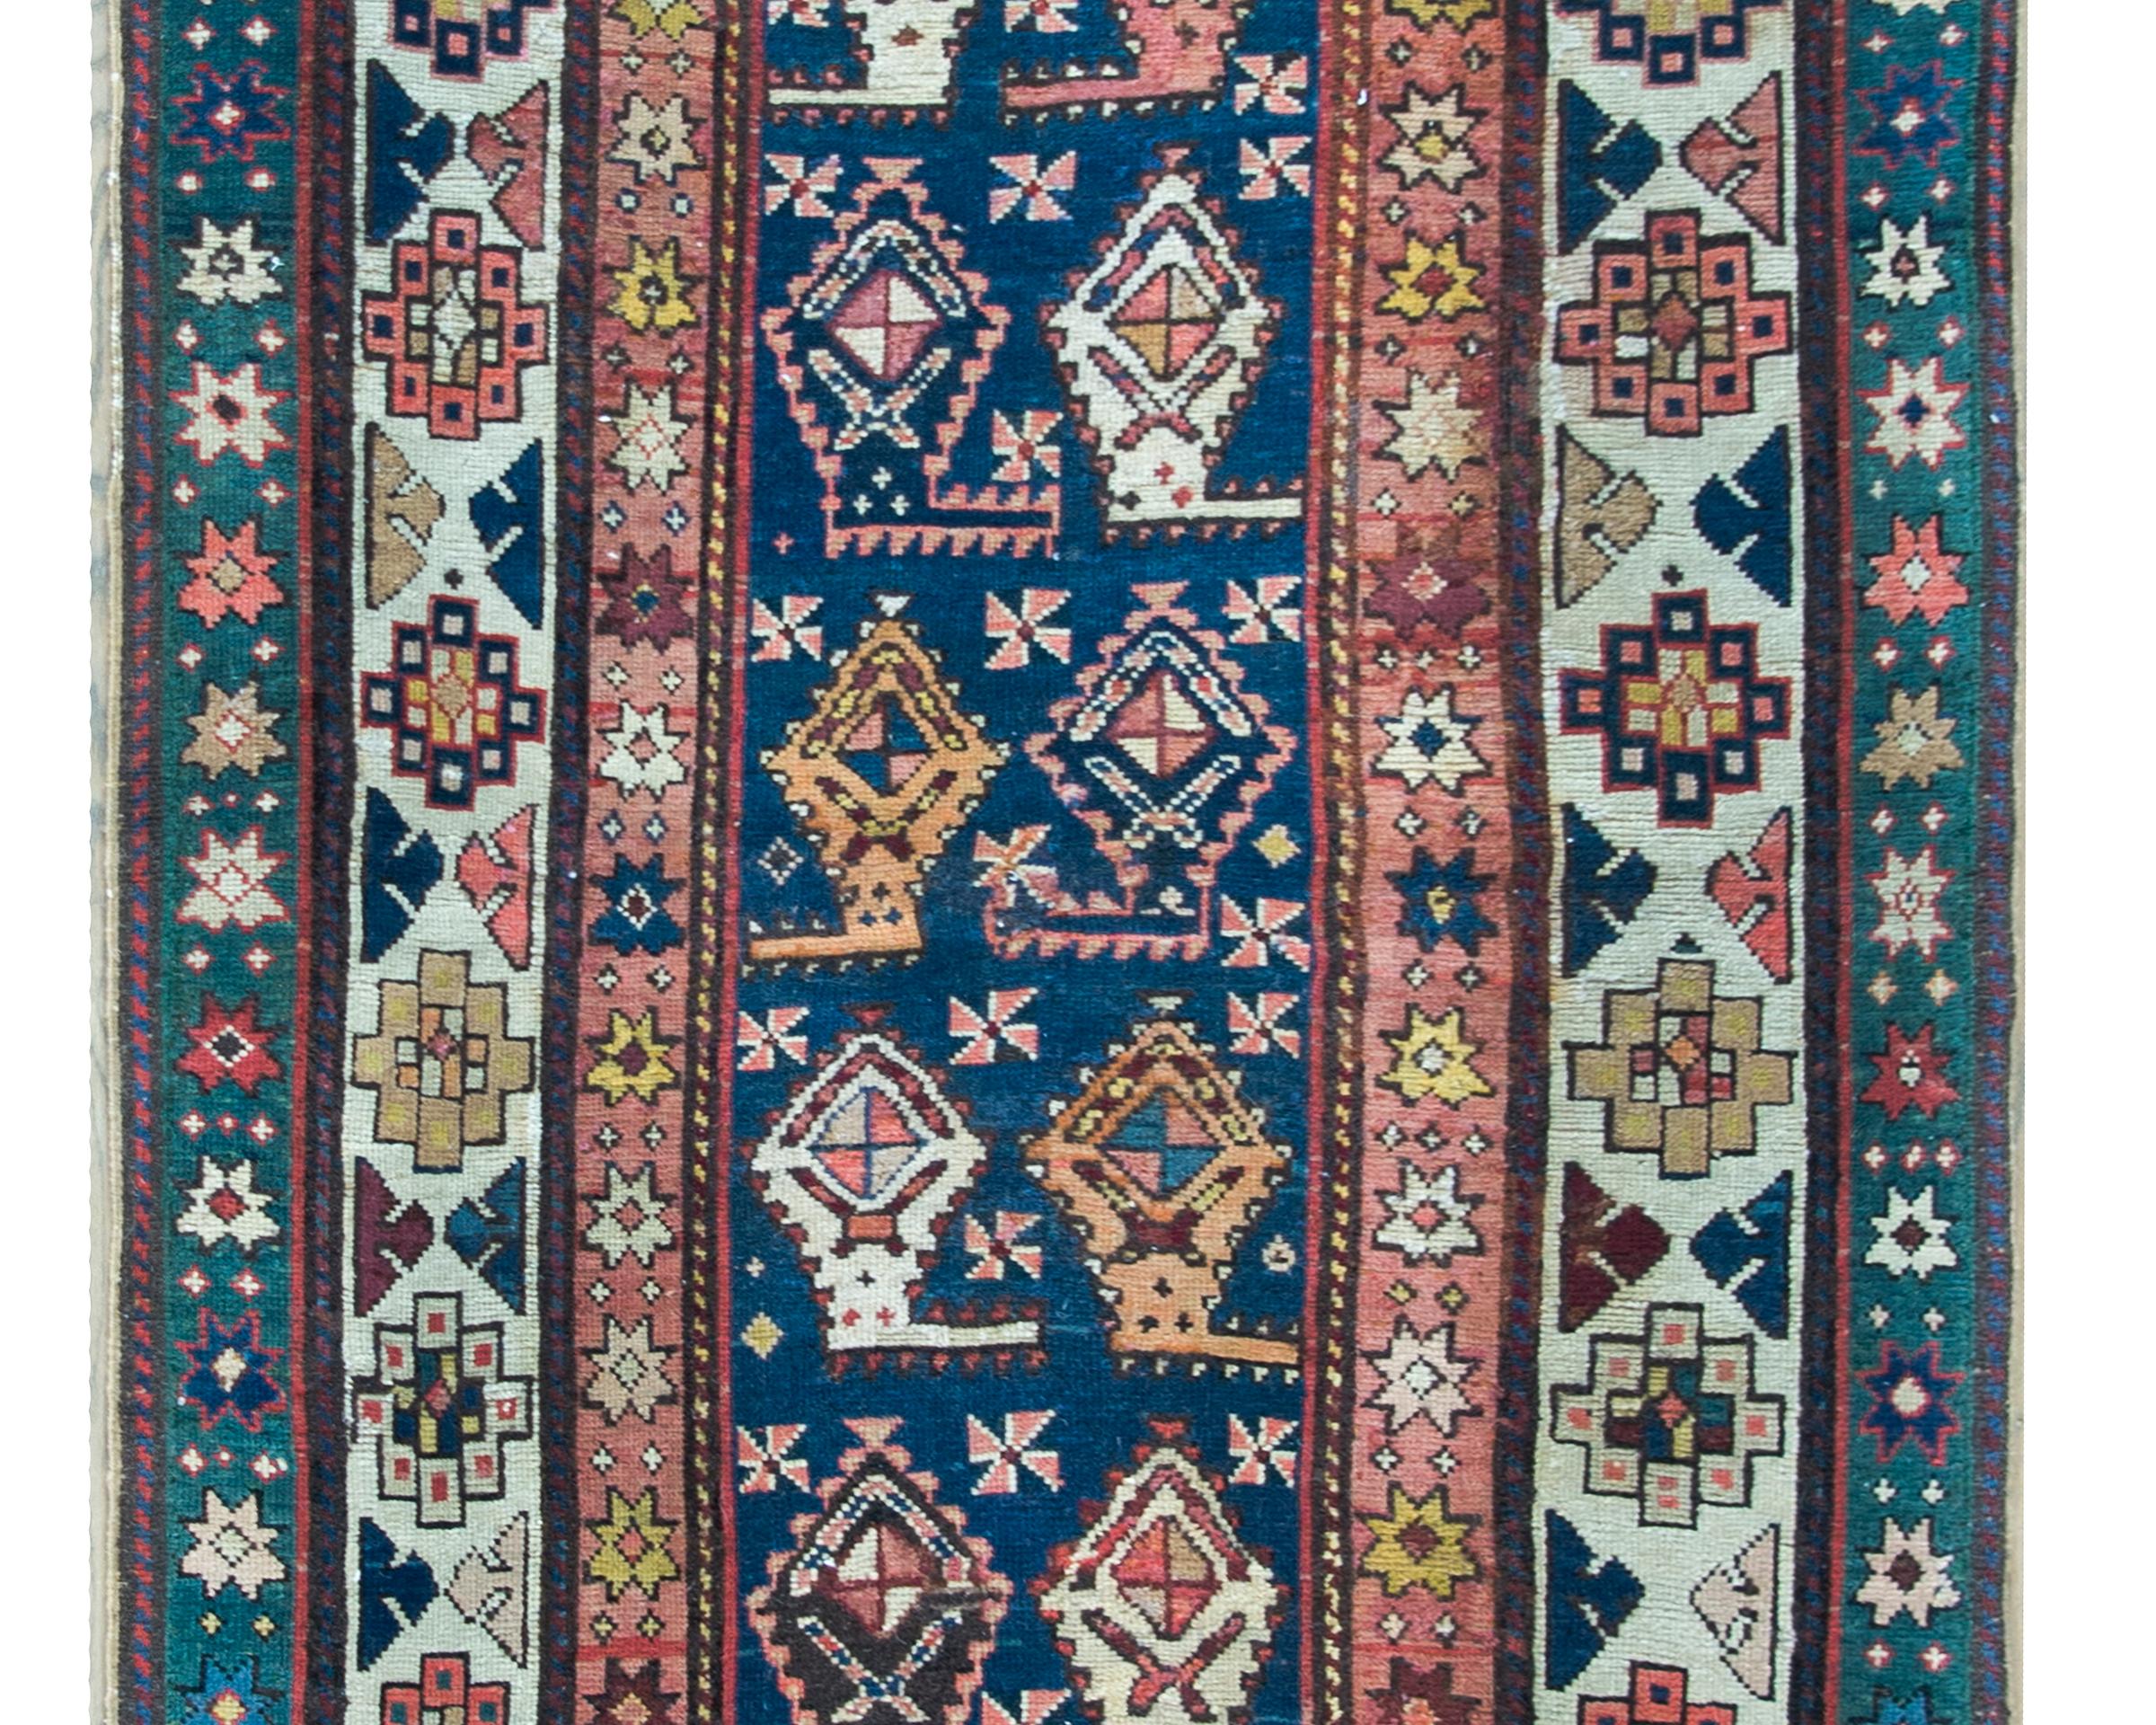 A remarkable late 19th century Azerbaijani Talesh runner with a repeated stylized paisley pattern woven in pinks, crimsons, white, golds and indigos set against a dark indigo background, and all surrounded by three distinct stylized floral patterned